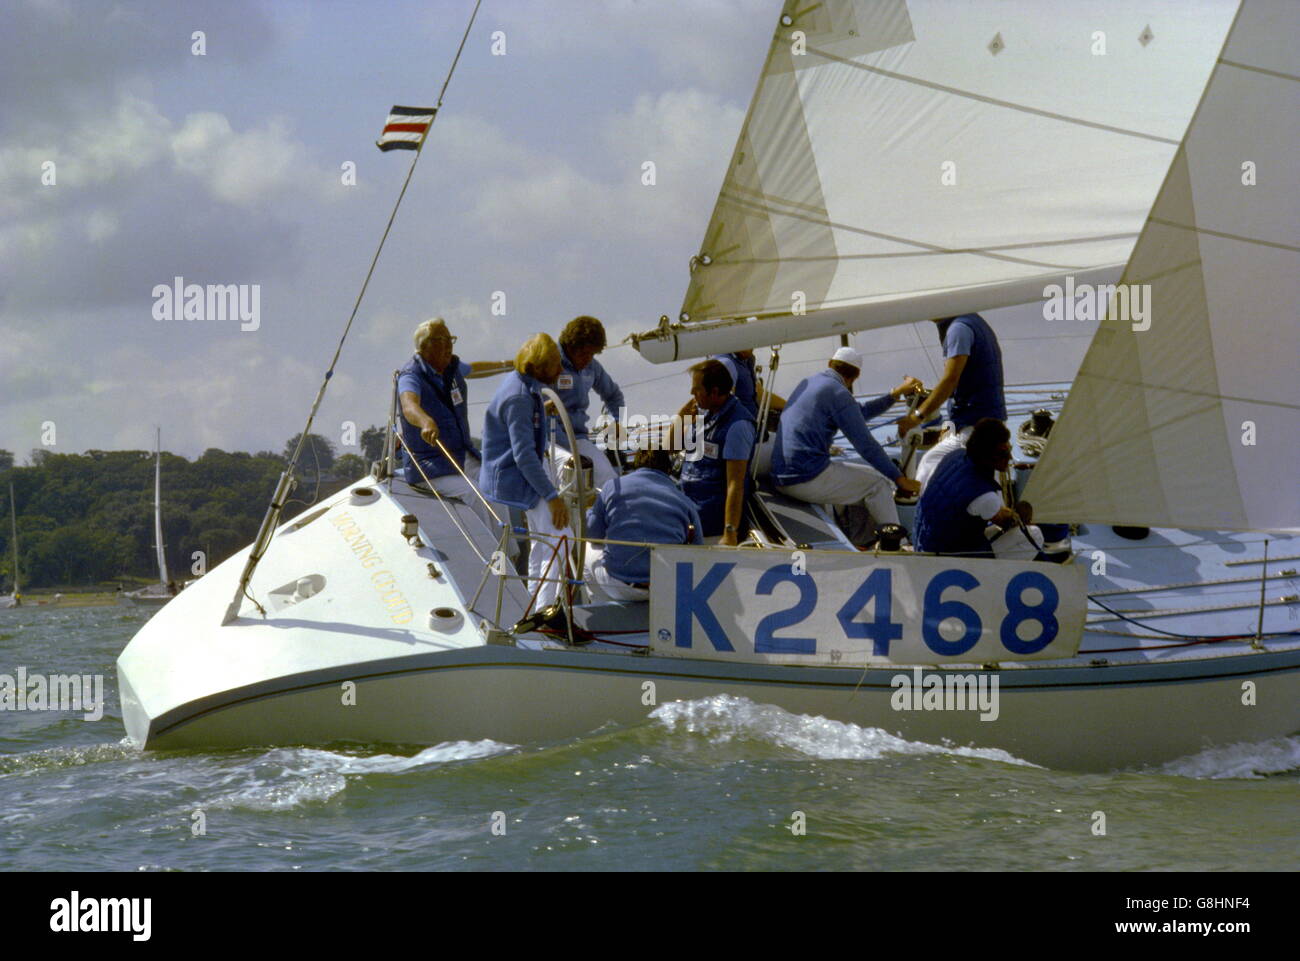 AJAX NEWS PHOTOS. 1979. SOLENT, ENGLAND. 1979. - EDWARD HEATH IN HIS YACHT MORNING CLOUD V AT THE START OF THE CHANNEL RACE. PHOTO:JONATHAN EASTLAND/AJAX  REF:CND1979 Stock Photo